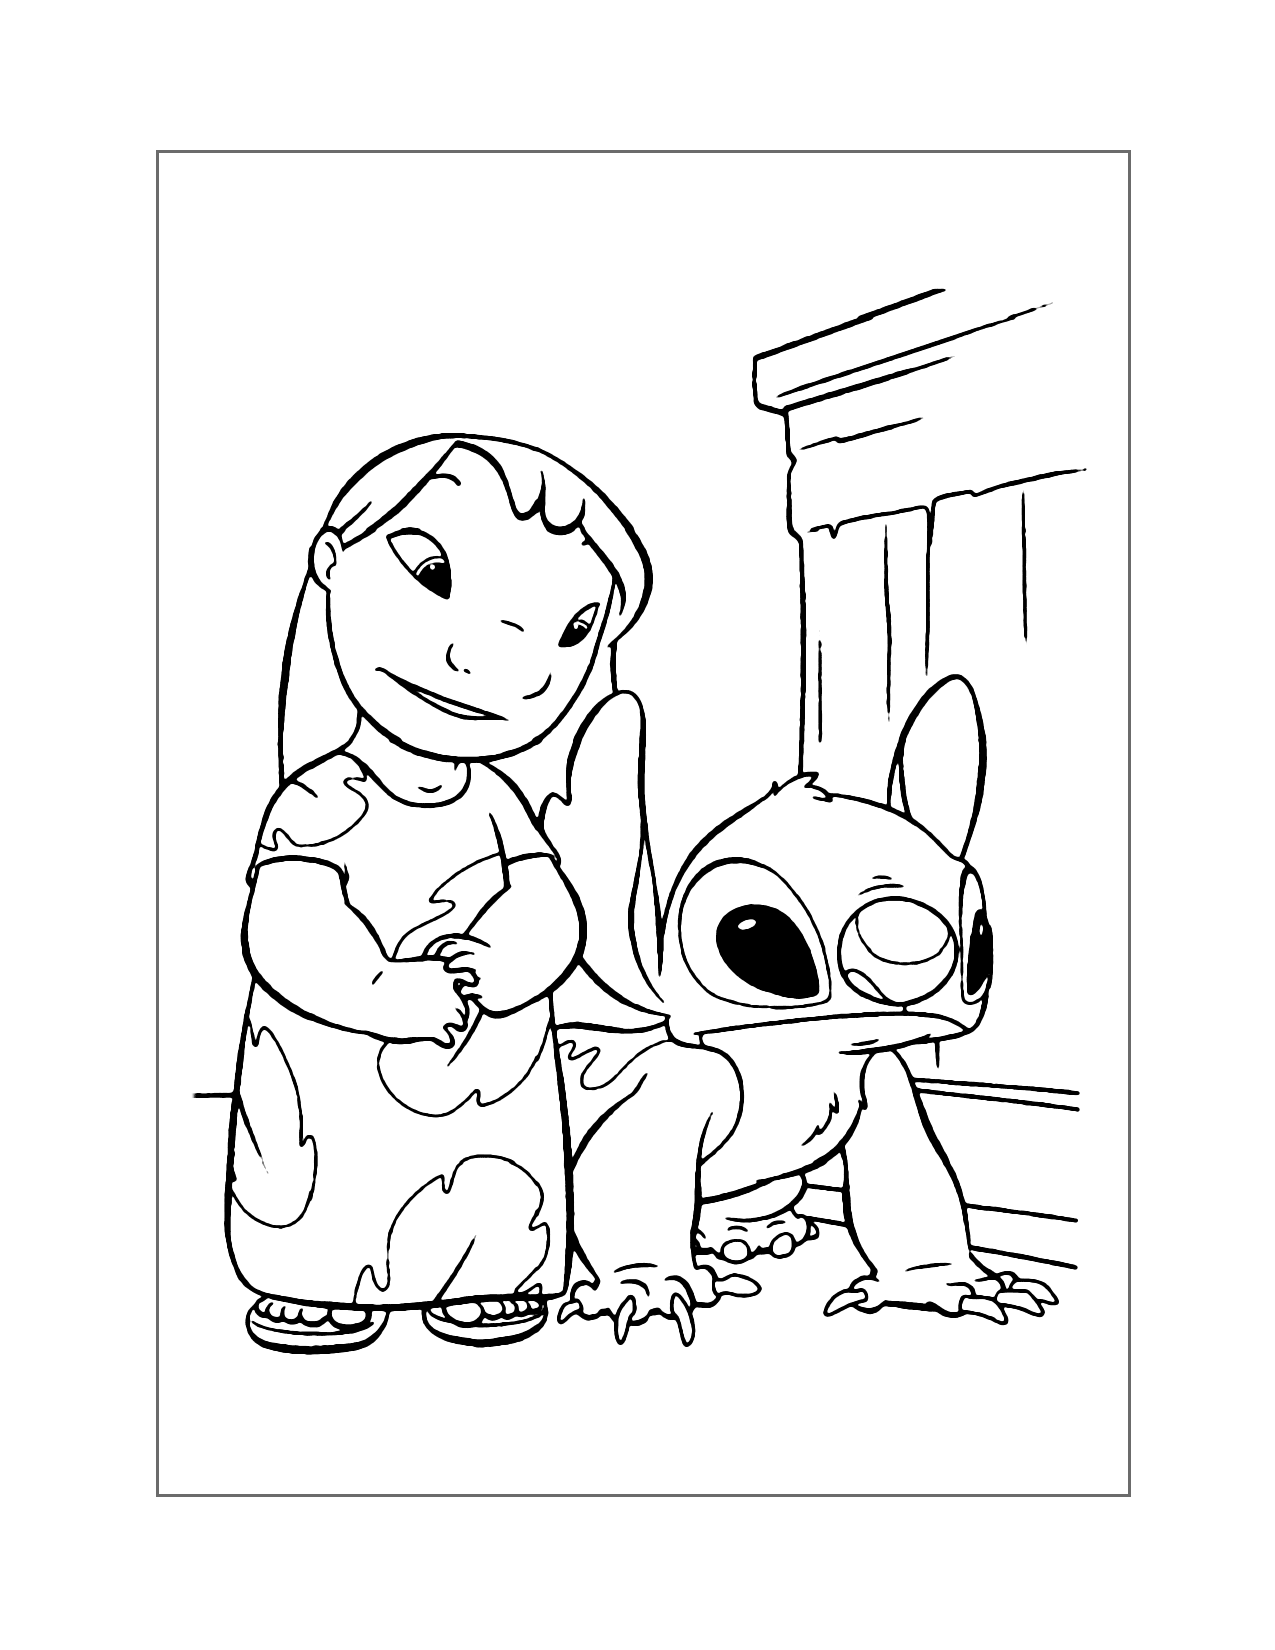 Lilo and stitch pages â printable pages